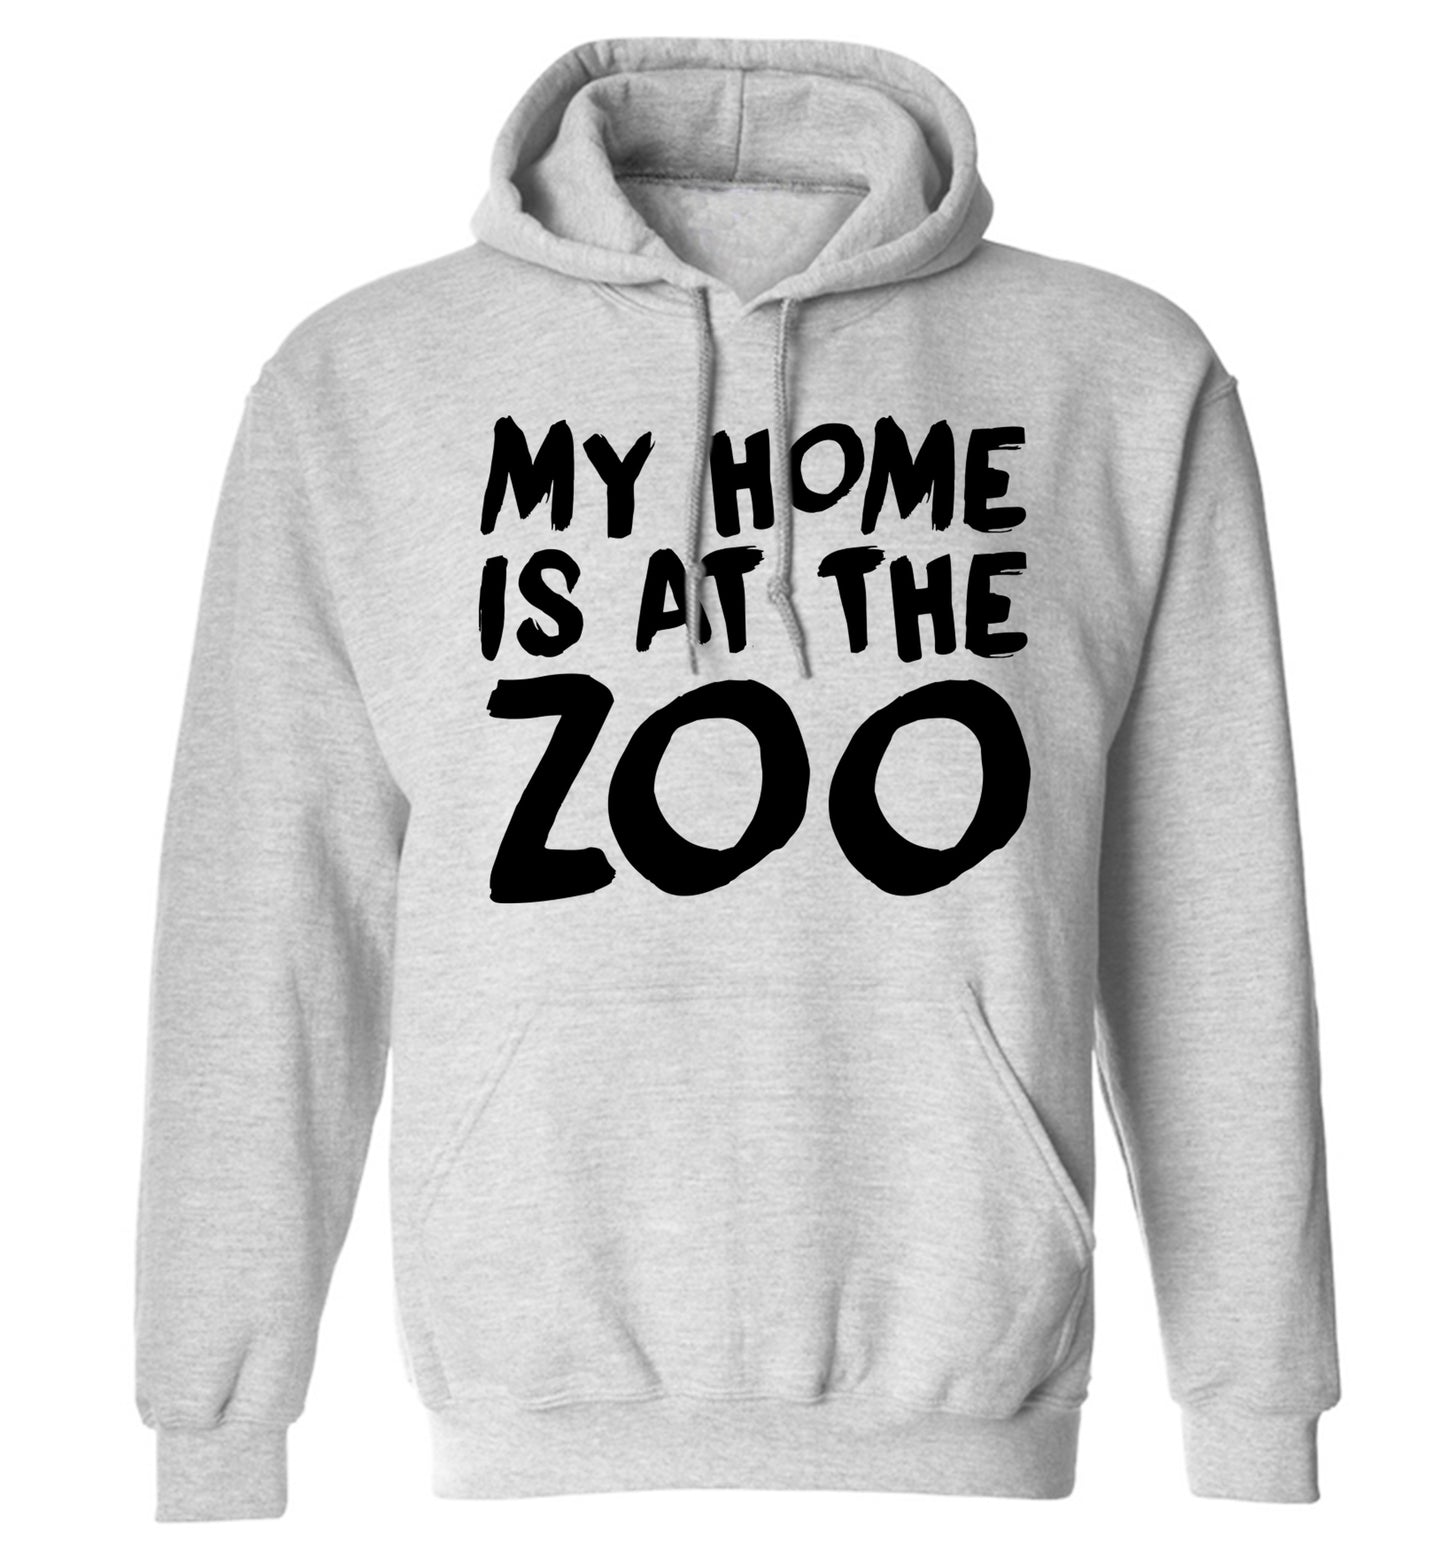 My home is at the zoo adults unisex grey hoodie 2XL